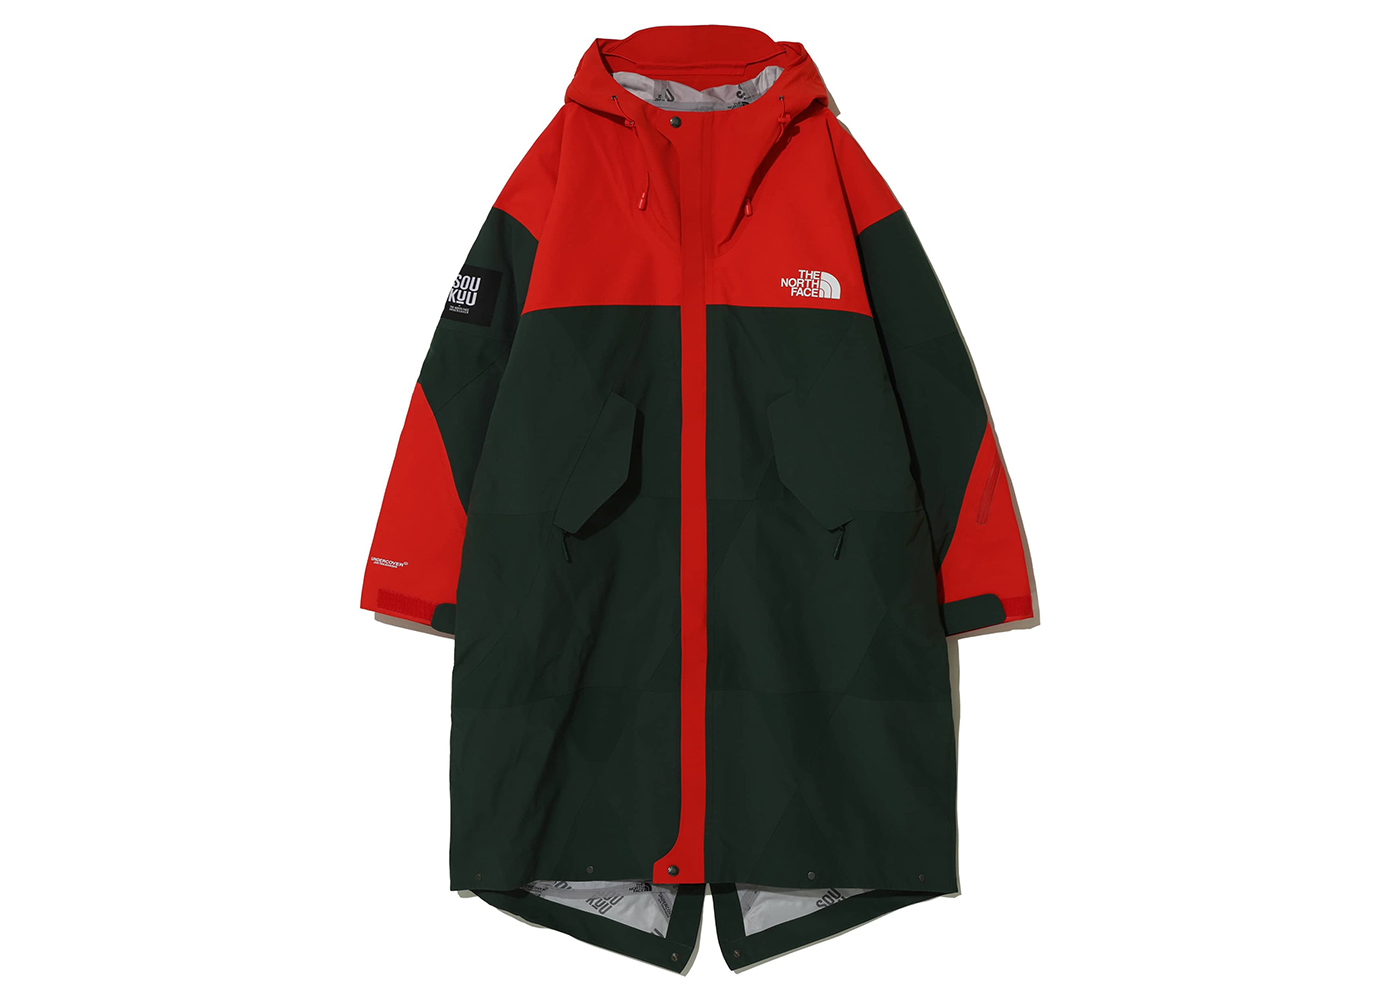 The North Face x Undercover Soukuu Geodesic Shell Jacket